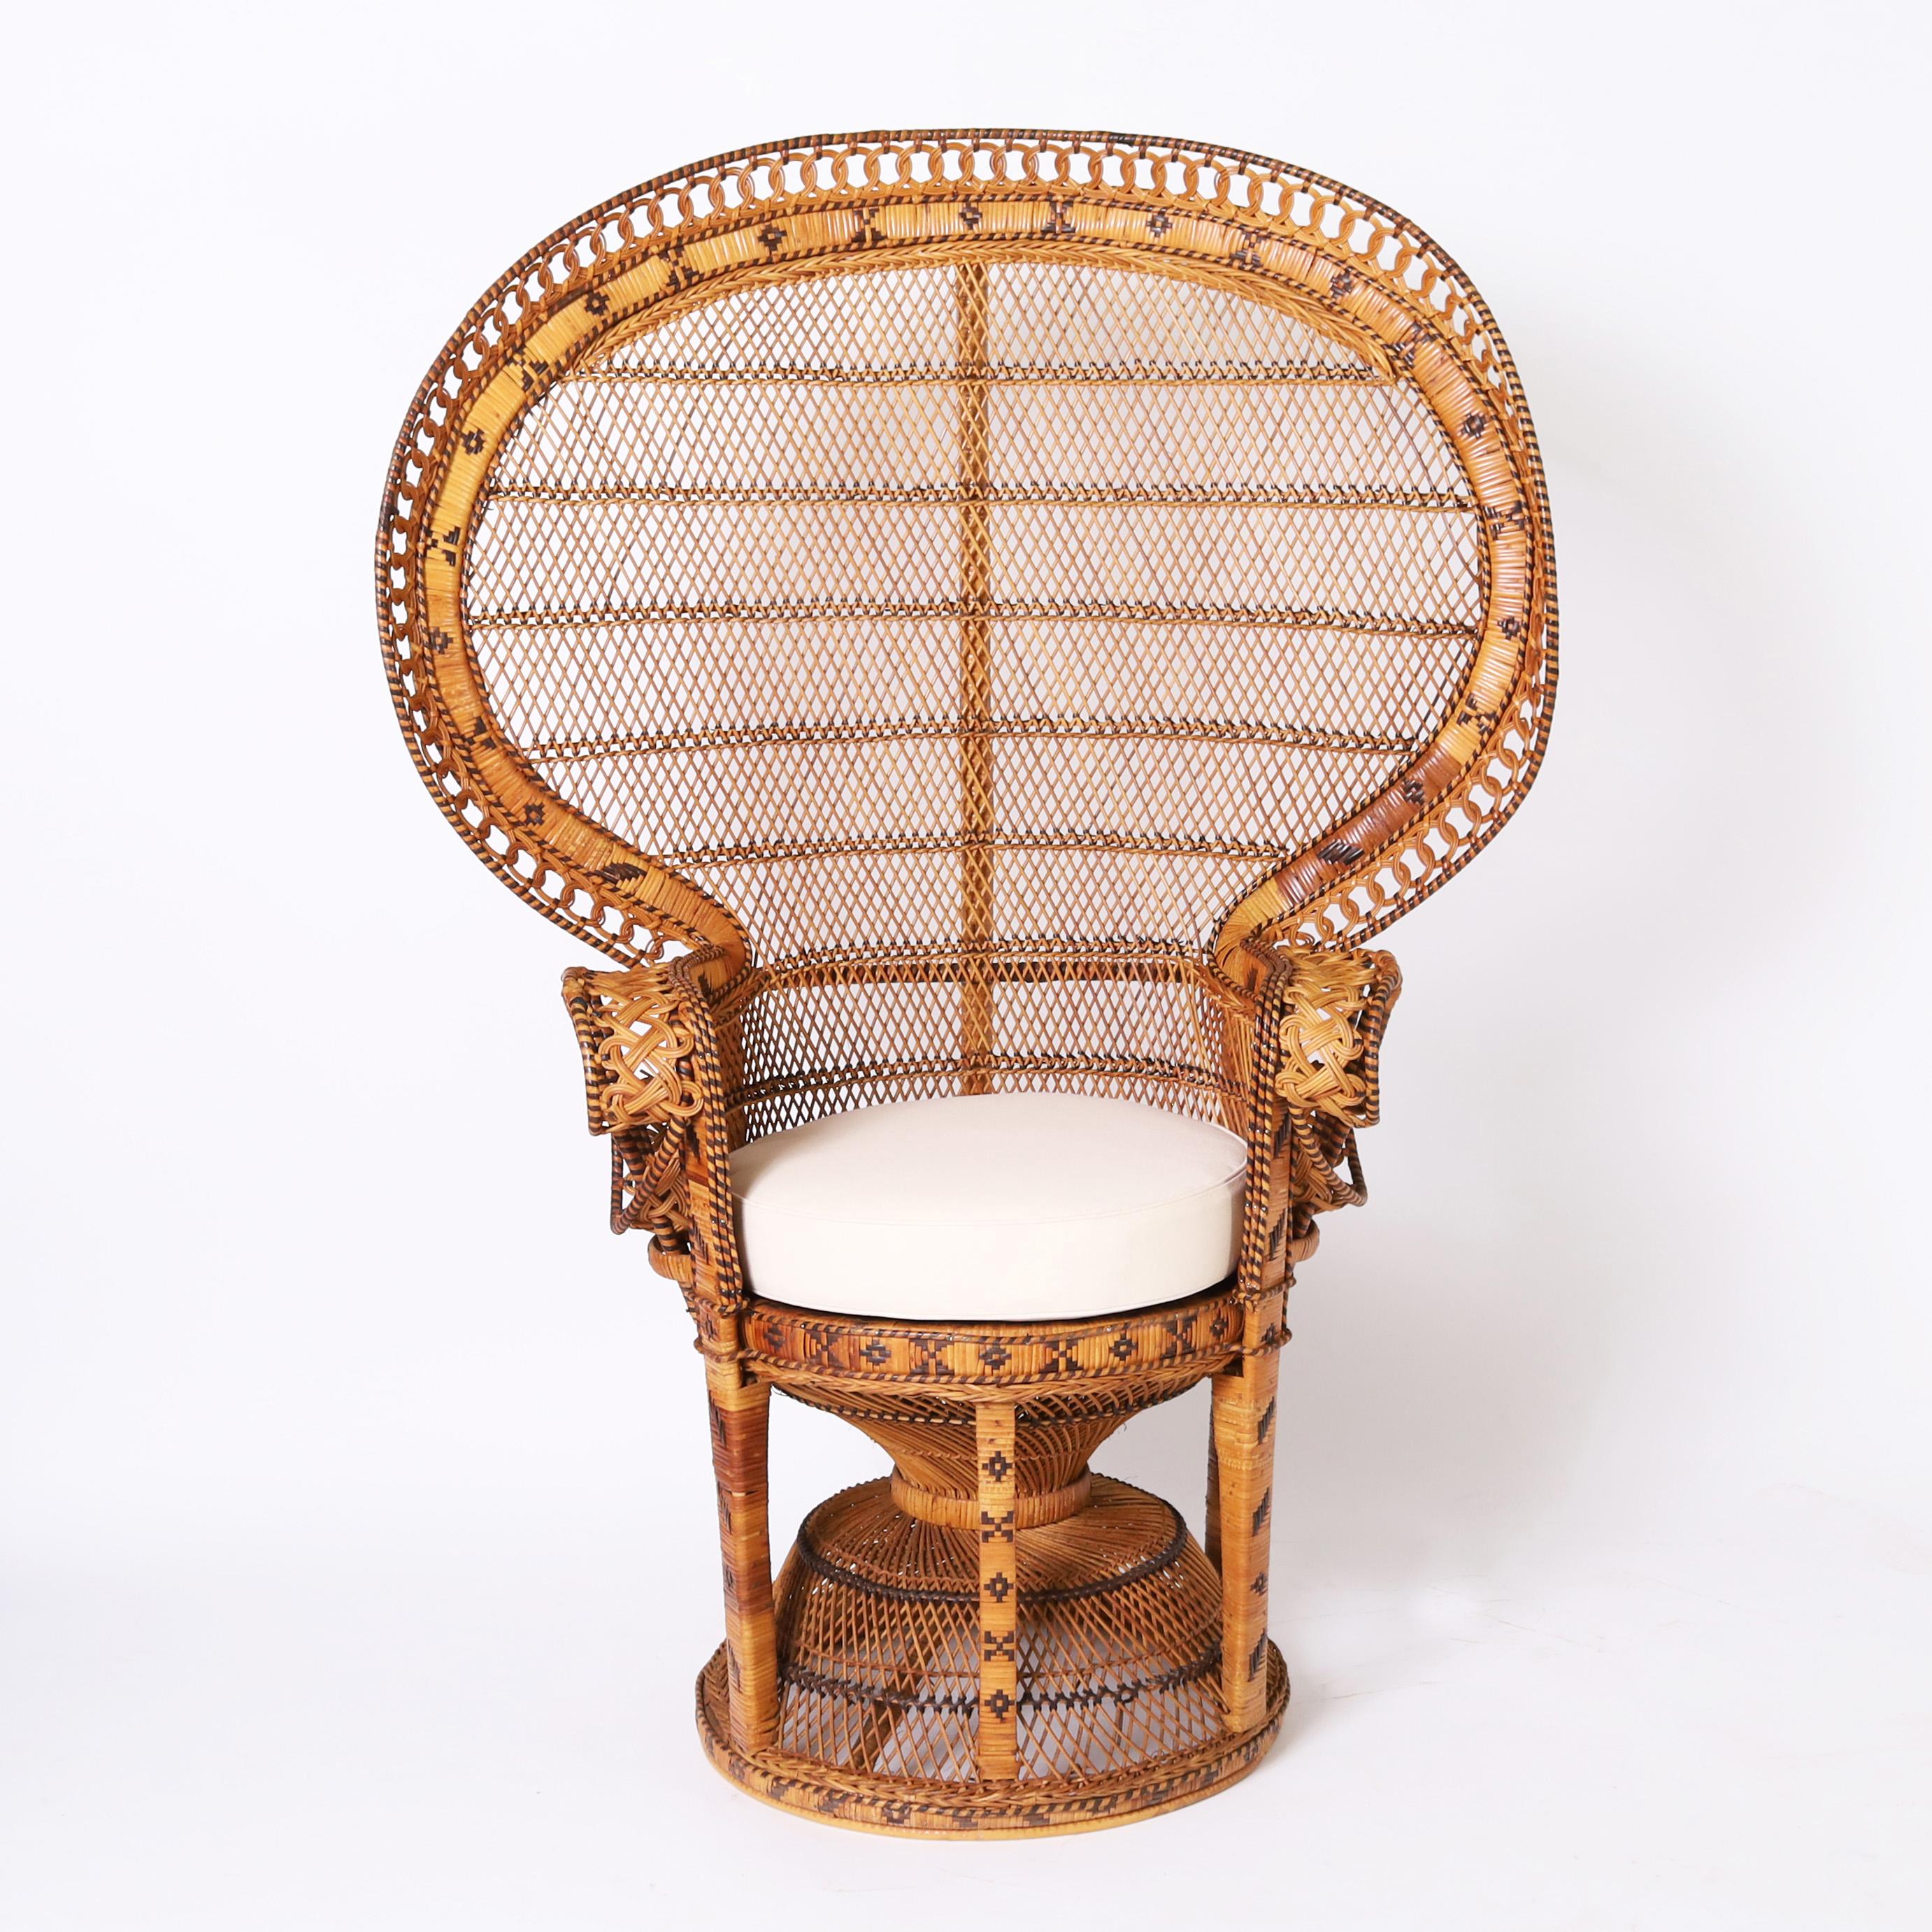 Transporting Anglo Indian peacock chair and footstool handcrafted in wicker and rattan in an iconic form with painted symbolic geometric highlights. 

Stool measures H: 18 DM: 17